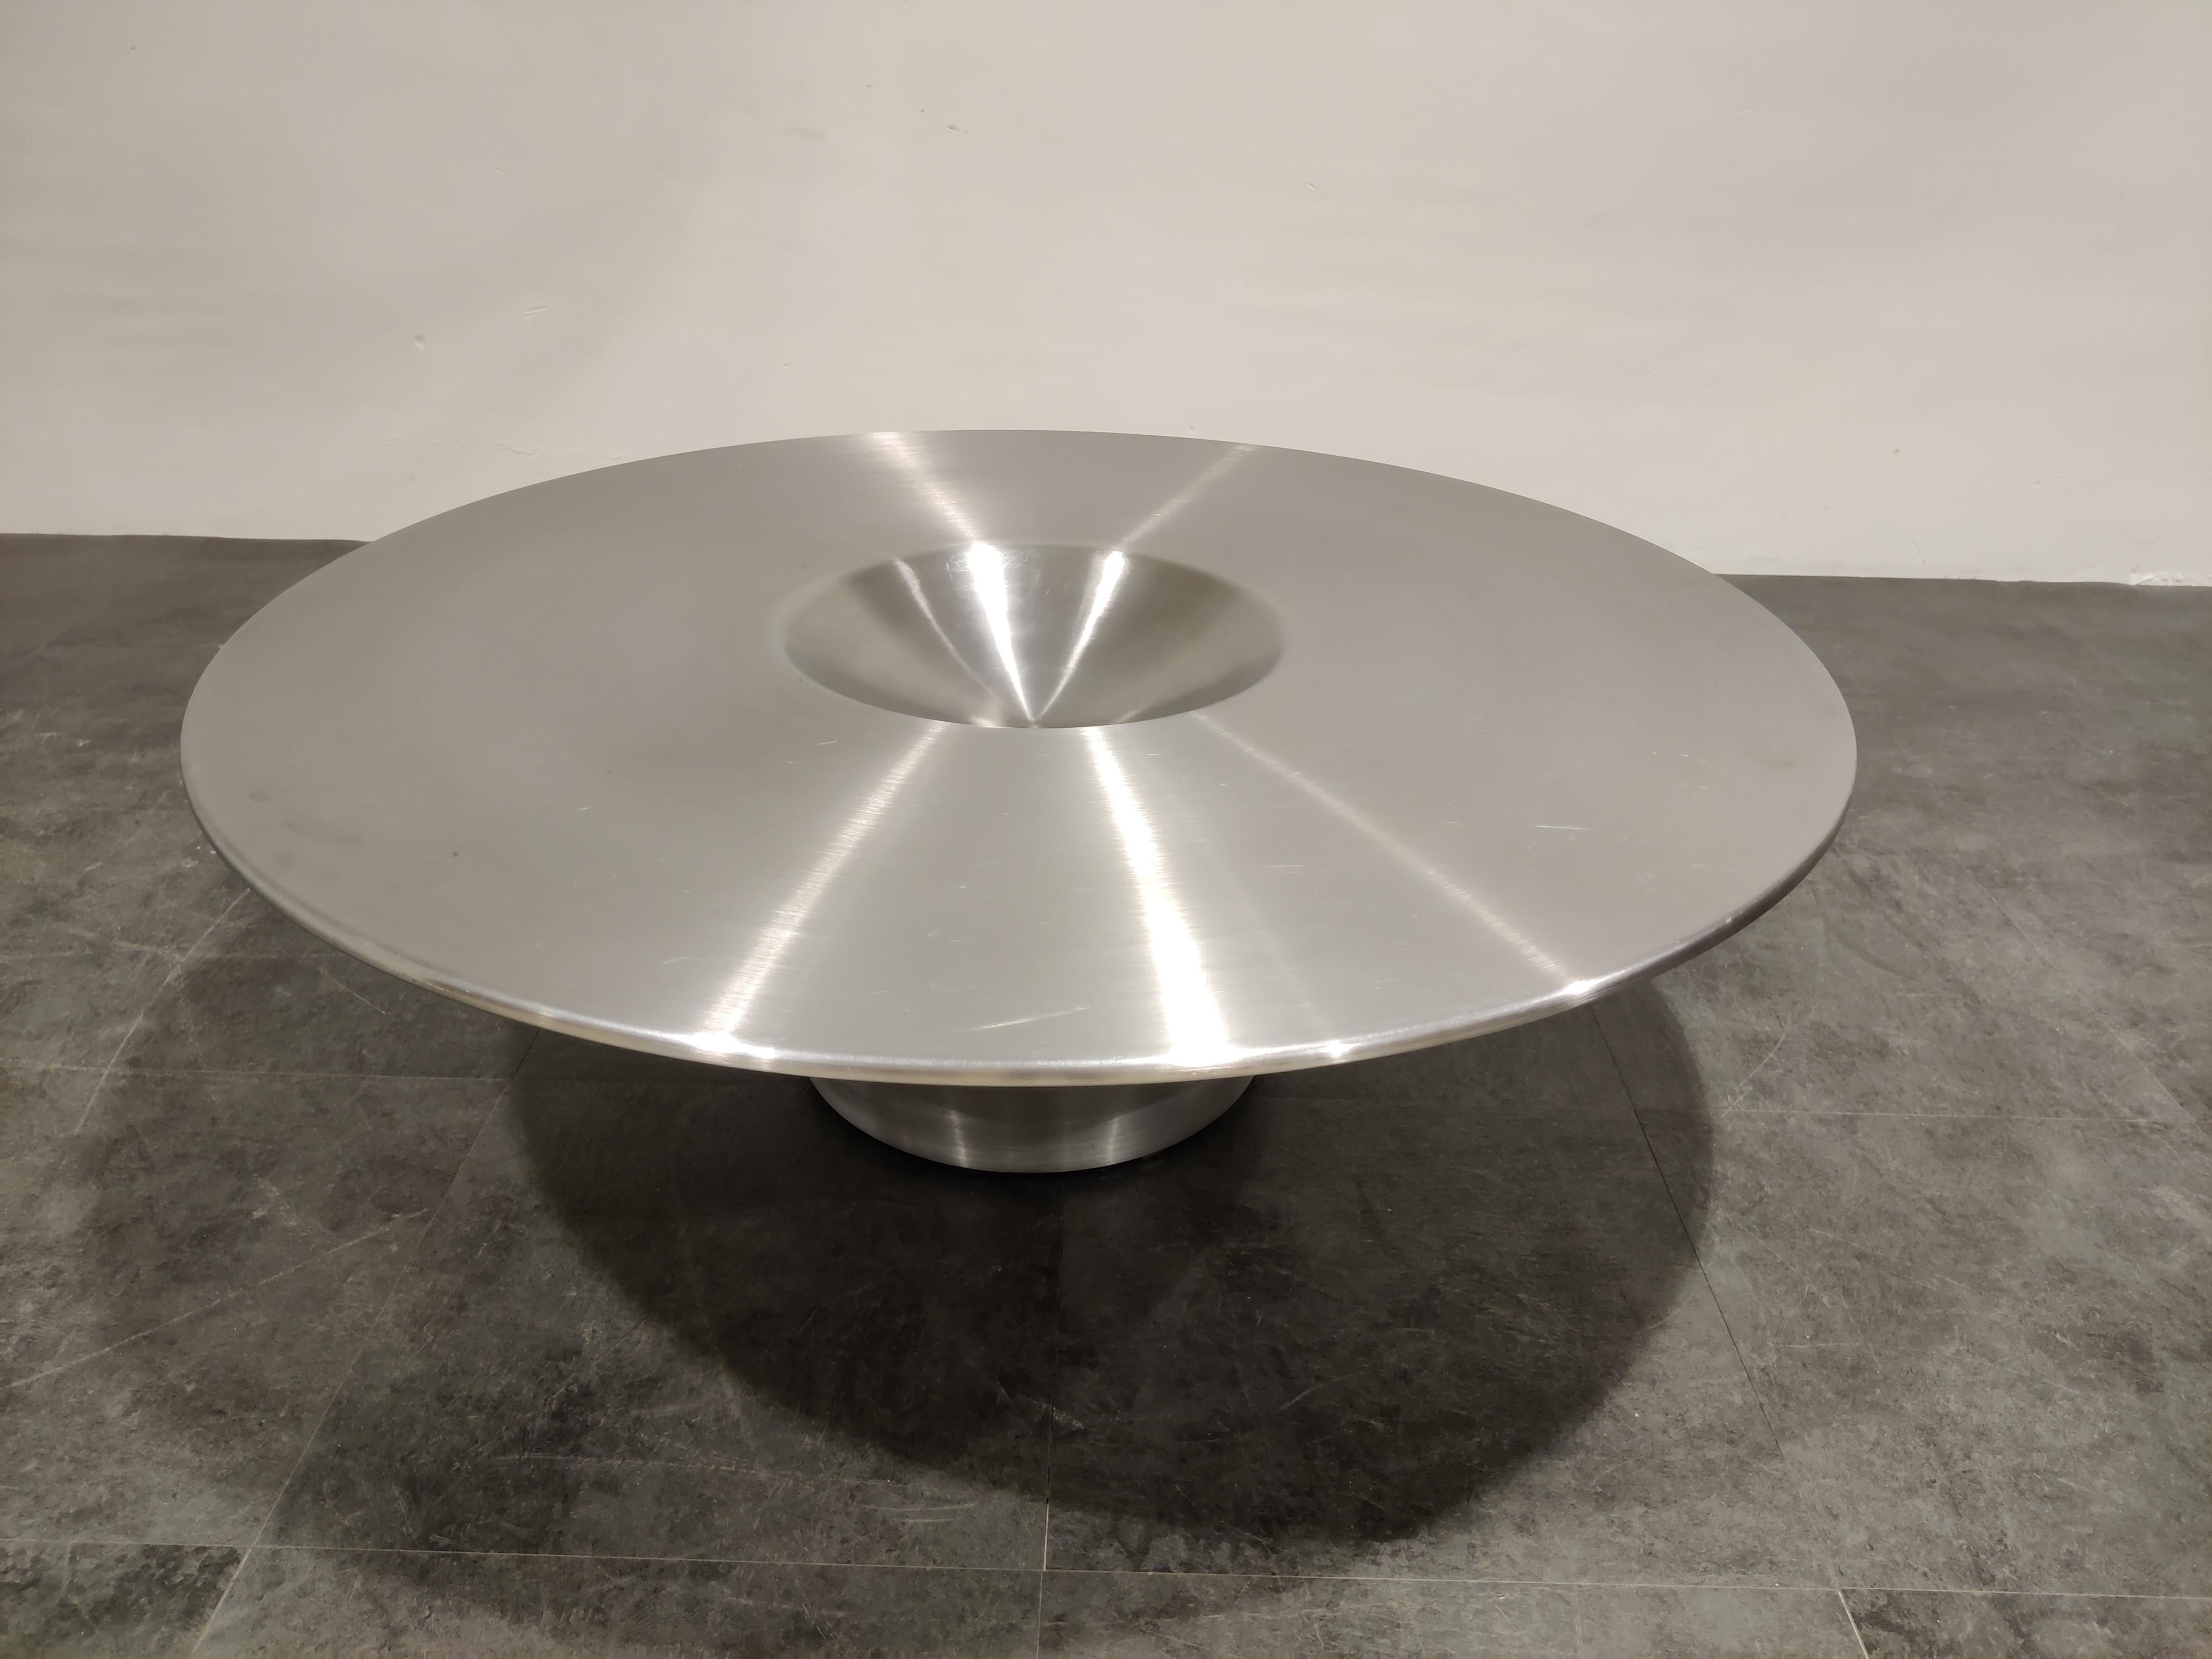 Unique stainless steel coffee table designed by Yasuhiro Shito for Cattelan Italy in 2002.

Very elegant and timeless design.

Although it dates from 2002 it has a very 1970s space age look about it.

The model is named 'Alien'.

Good